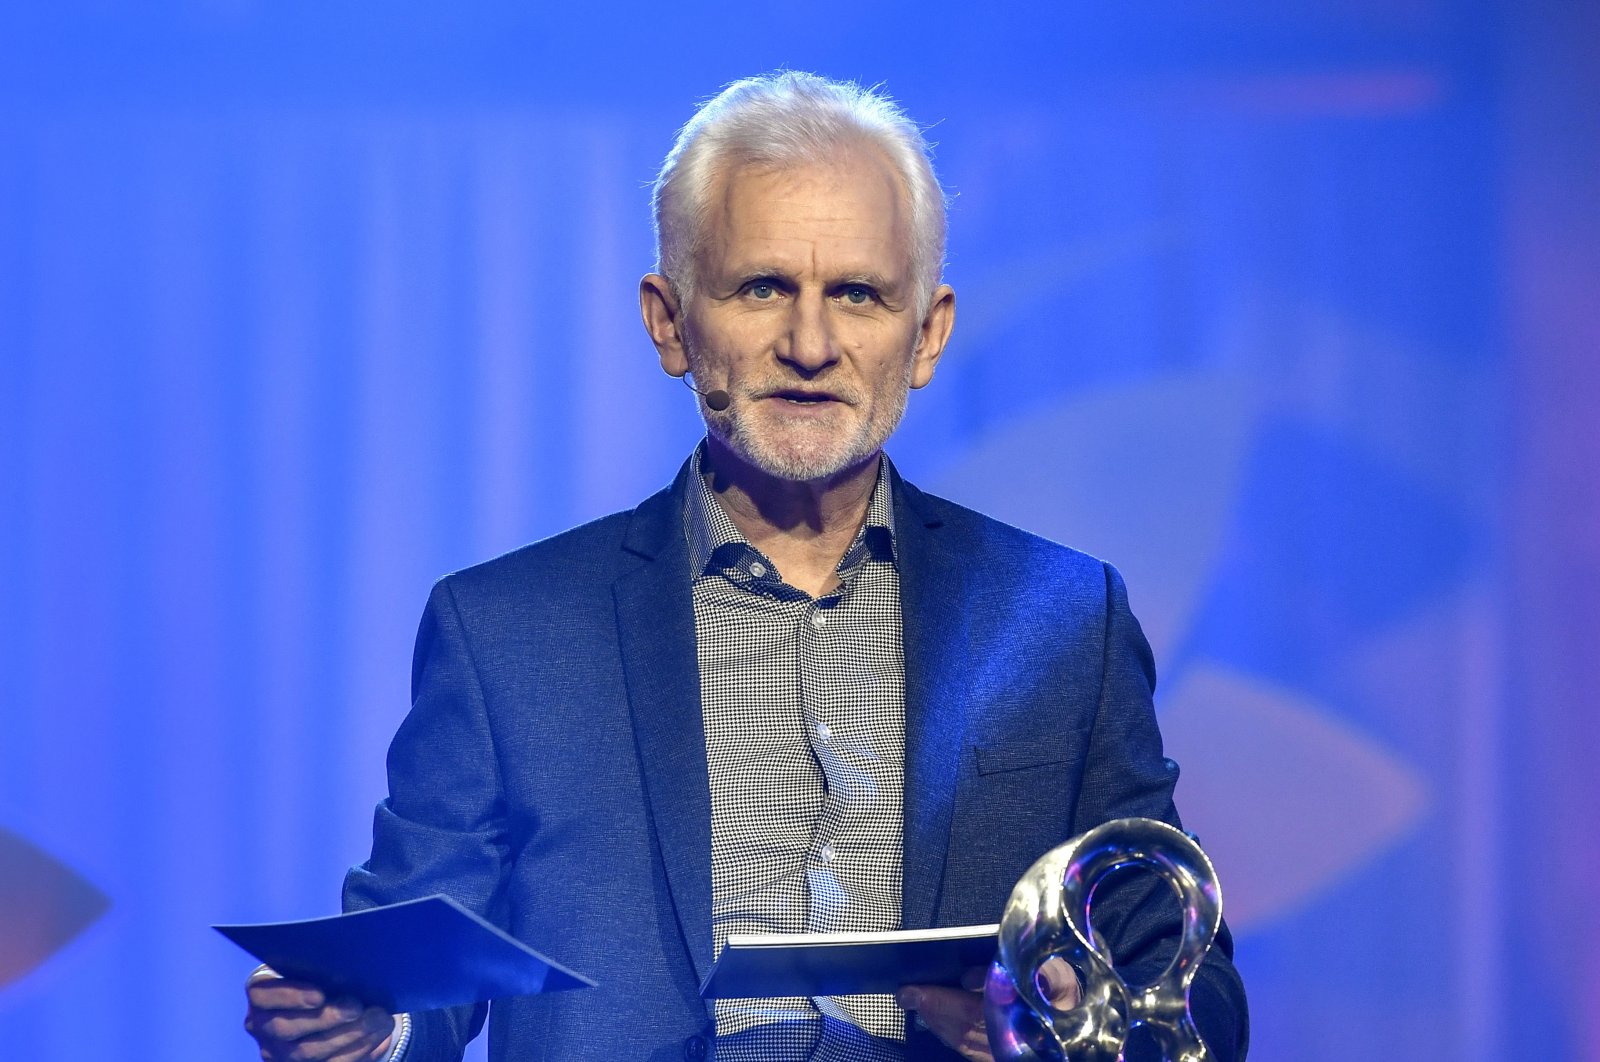 Belarusian democracy activist of the human rights organization Viasna, Ales Bialiatski speaks after receiving the 2020 Right Livelihood Award, Stockholm, Sweden, Dec. 3, 2020 (Reissued on Oct. 07 2022). (EPA Photo)